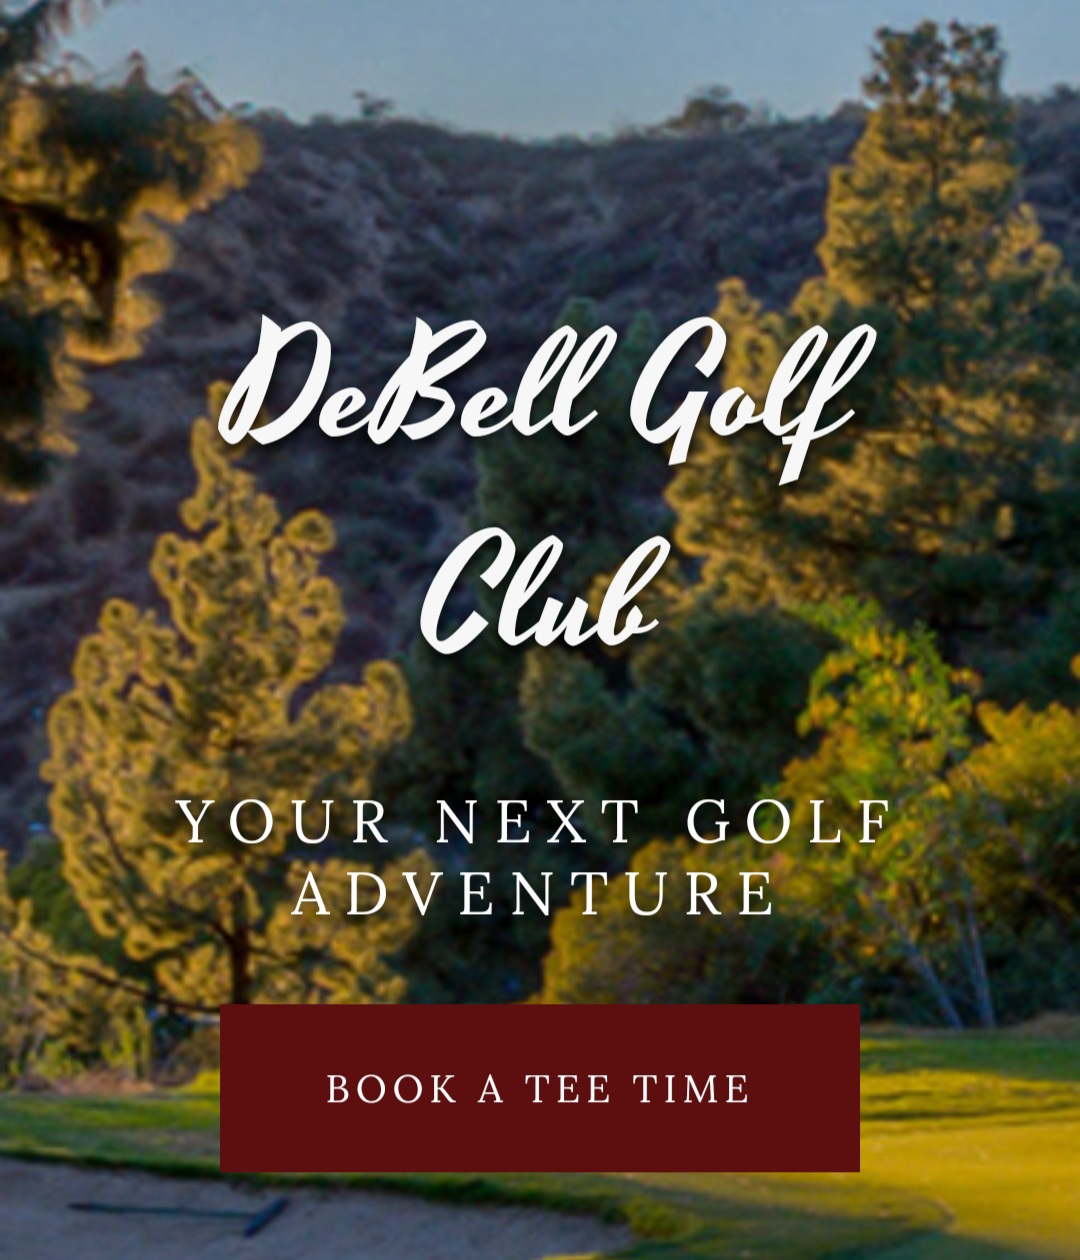 Round of Golf for 4 at DeBell Golf Club